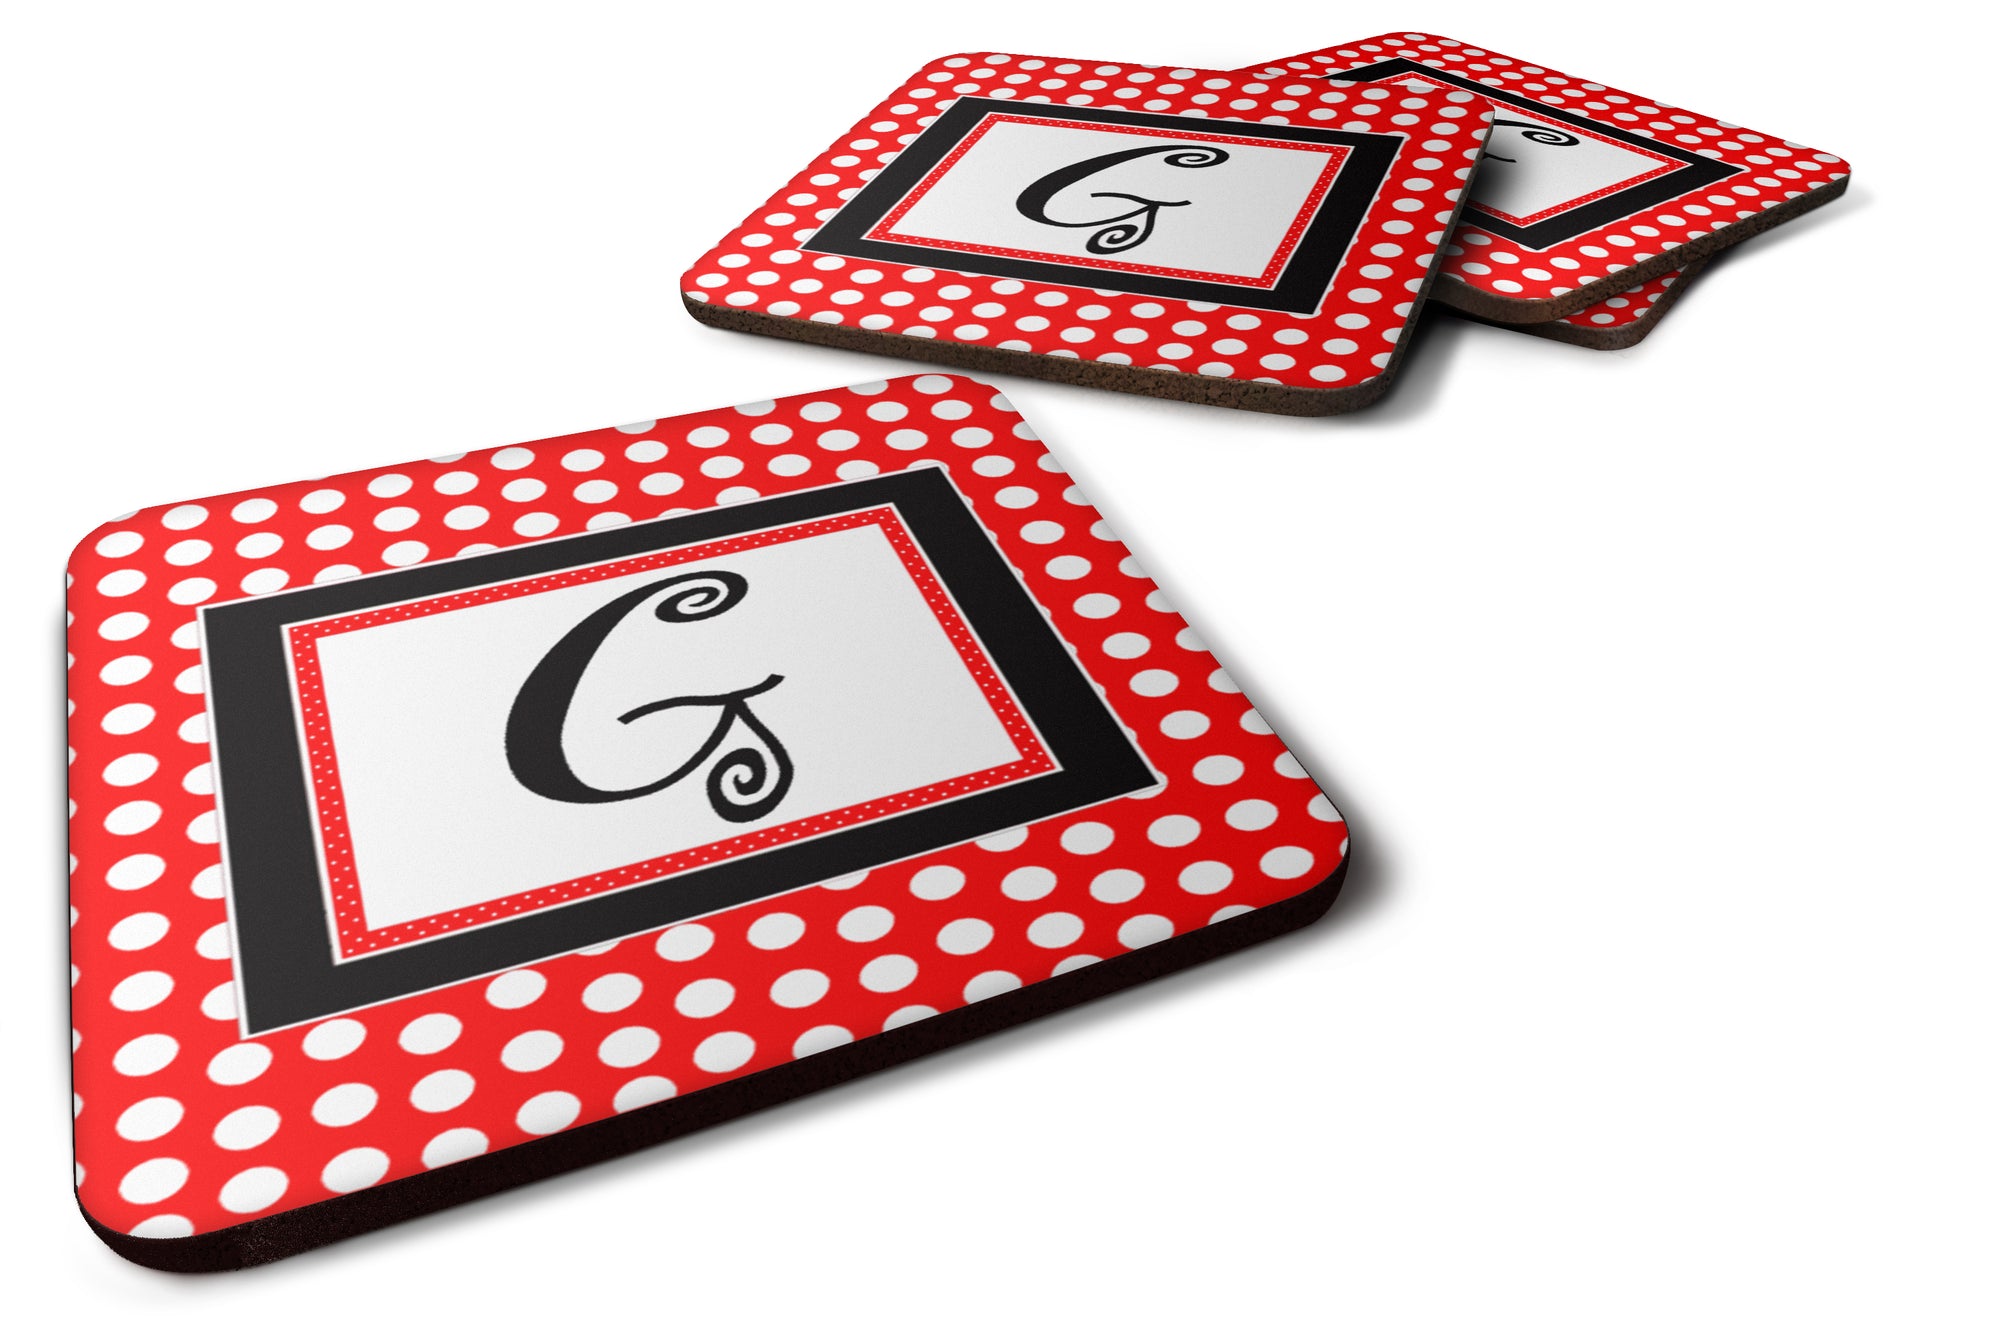 Set of 4 Monogram - Red Black Polka Dots Foam Coasters Initial Letter G - the-store.com